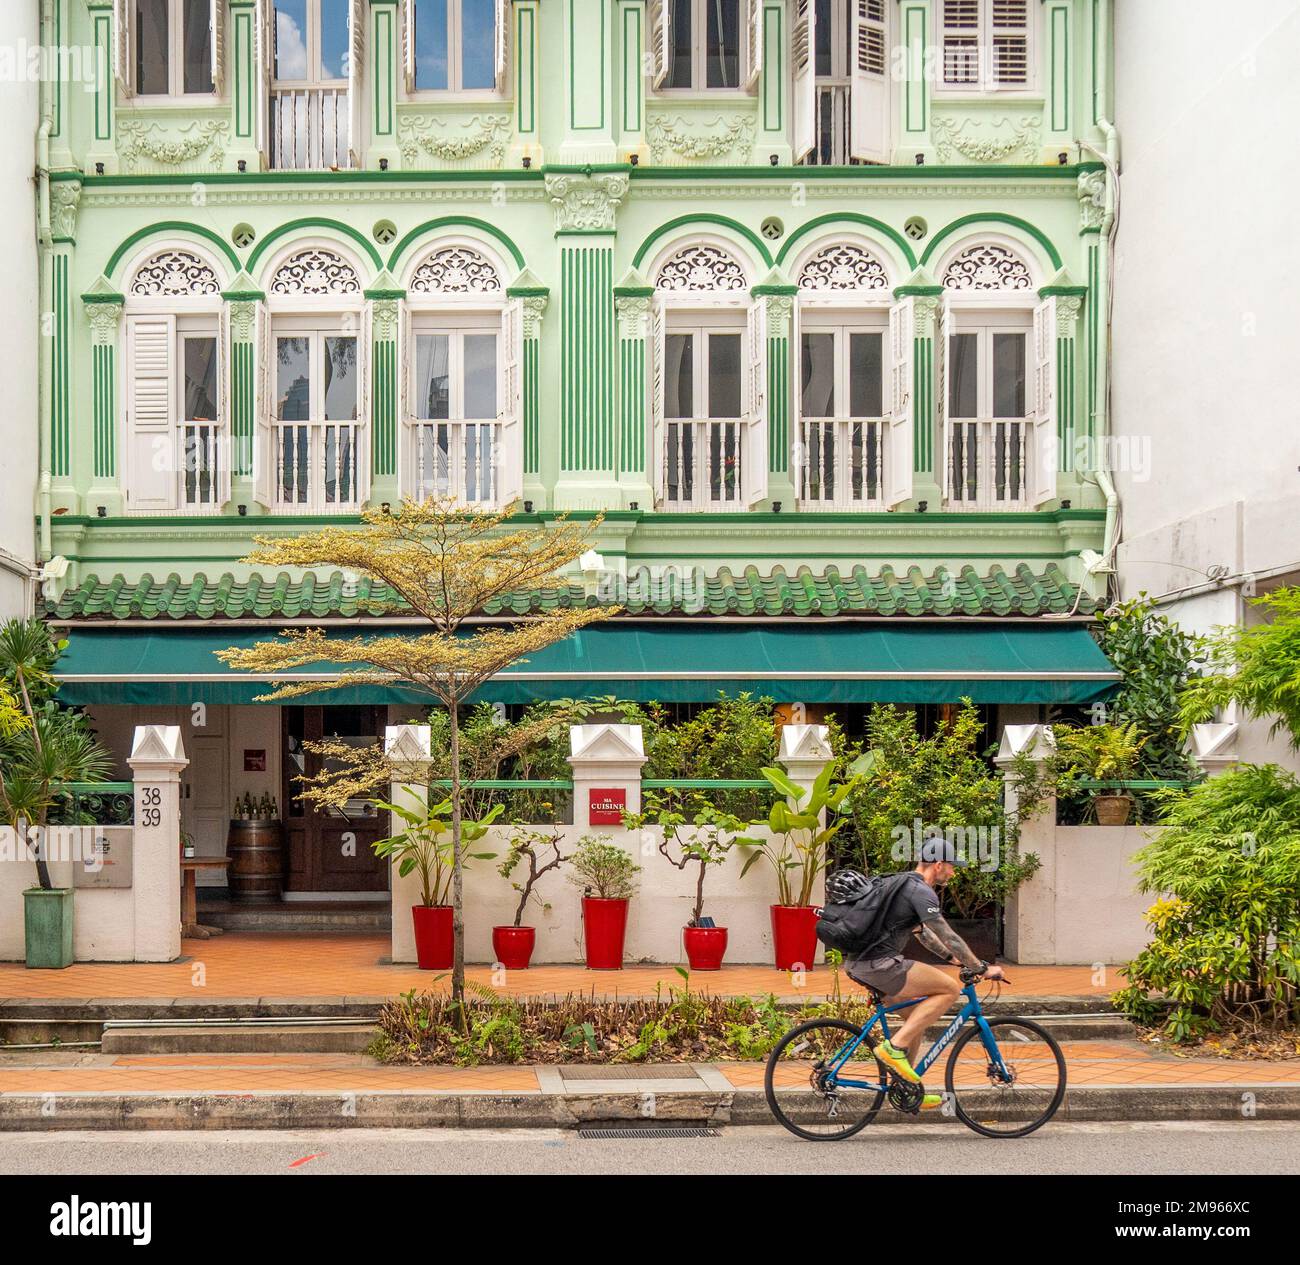 Cyclist riding bicycle pass terraced shophouses converted into a restaurant on Keong Saik Rd Chinatown Singapore Stock Photo